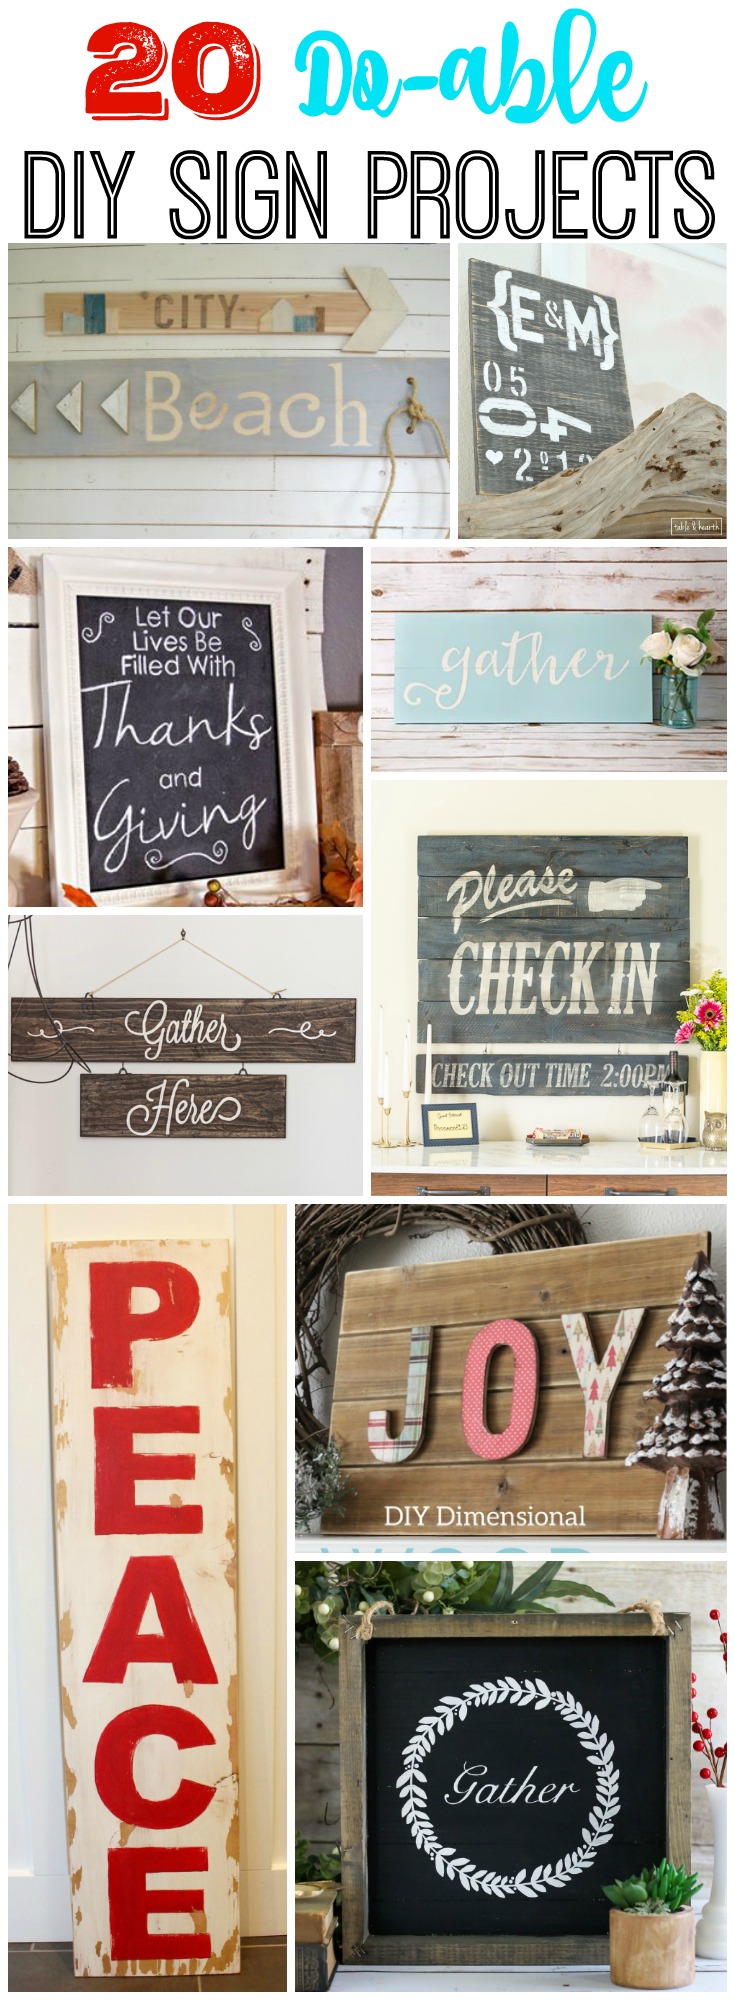 20 Do-able DIY Sign Projects